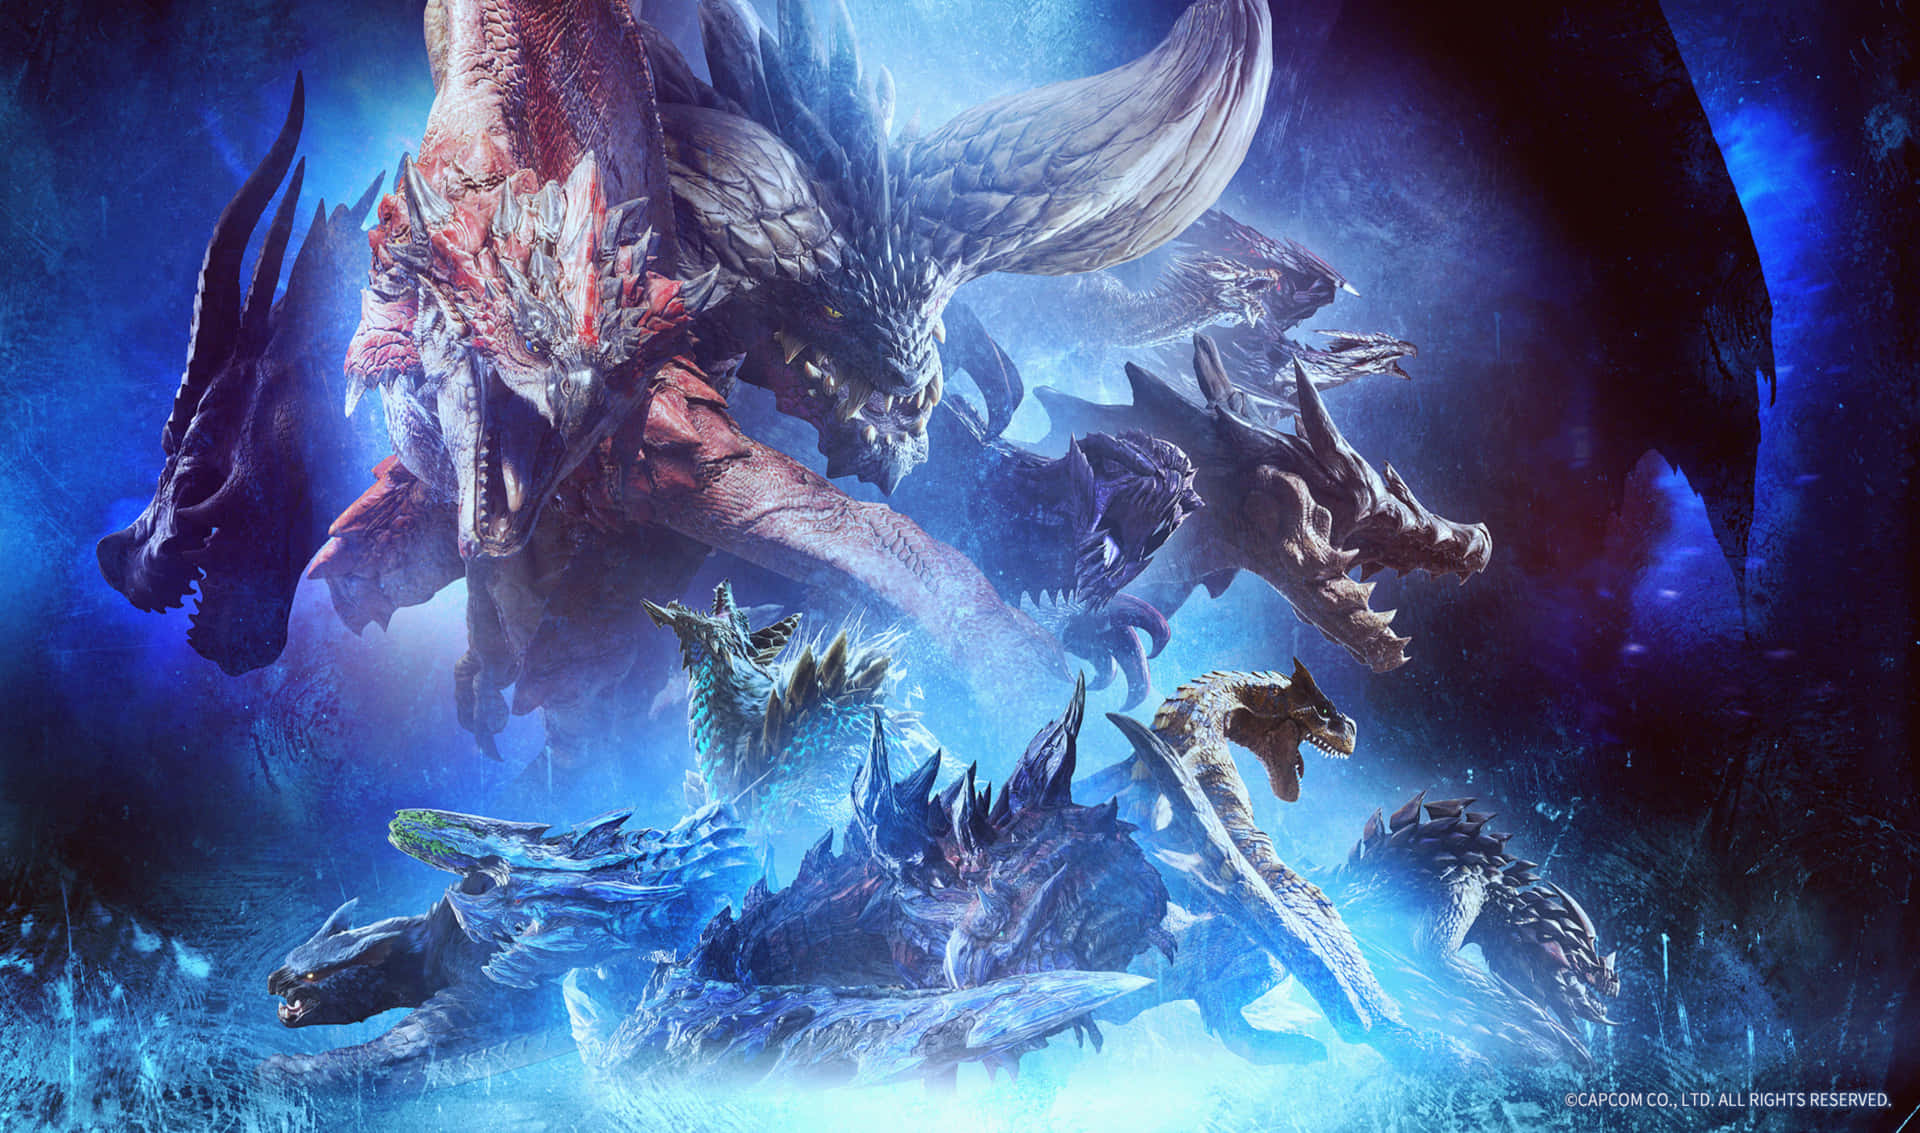 Join The Epic Hunt With Monster Hunter World